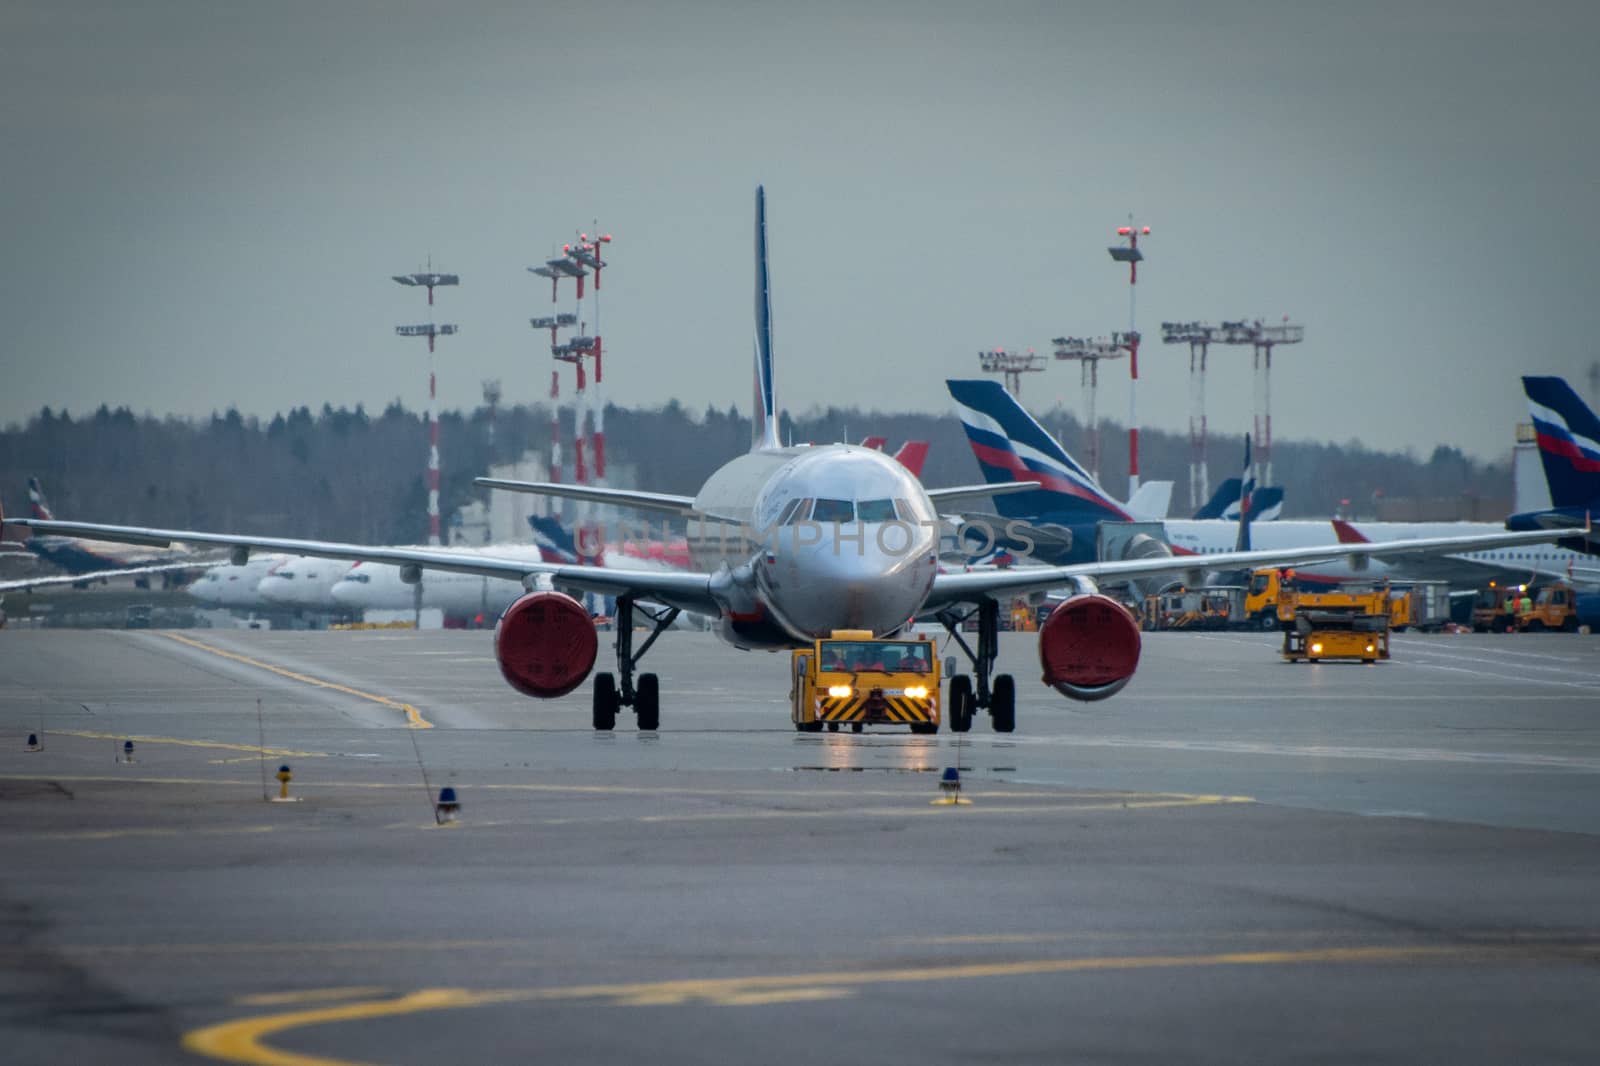 October 29, 2019, Moscow, Russia. Plane 
Aeroflot - Russian Airlines at Sheremetyevo airport in Moscow.